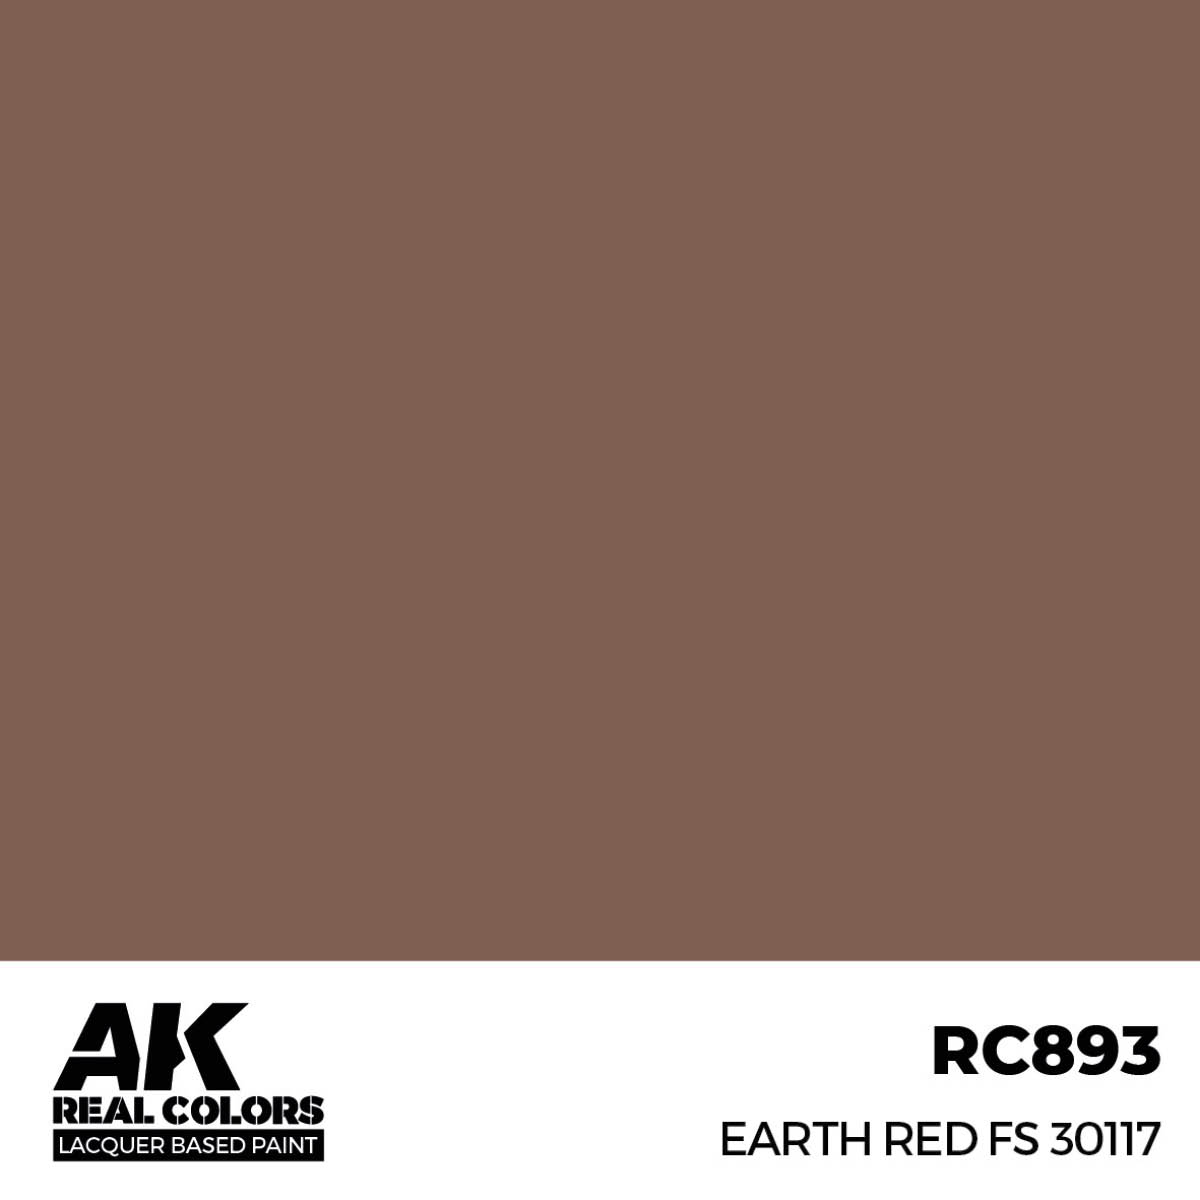 Earth Red FS 30117